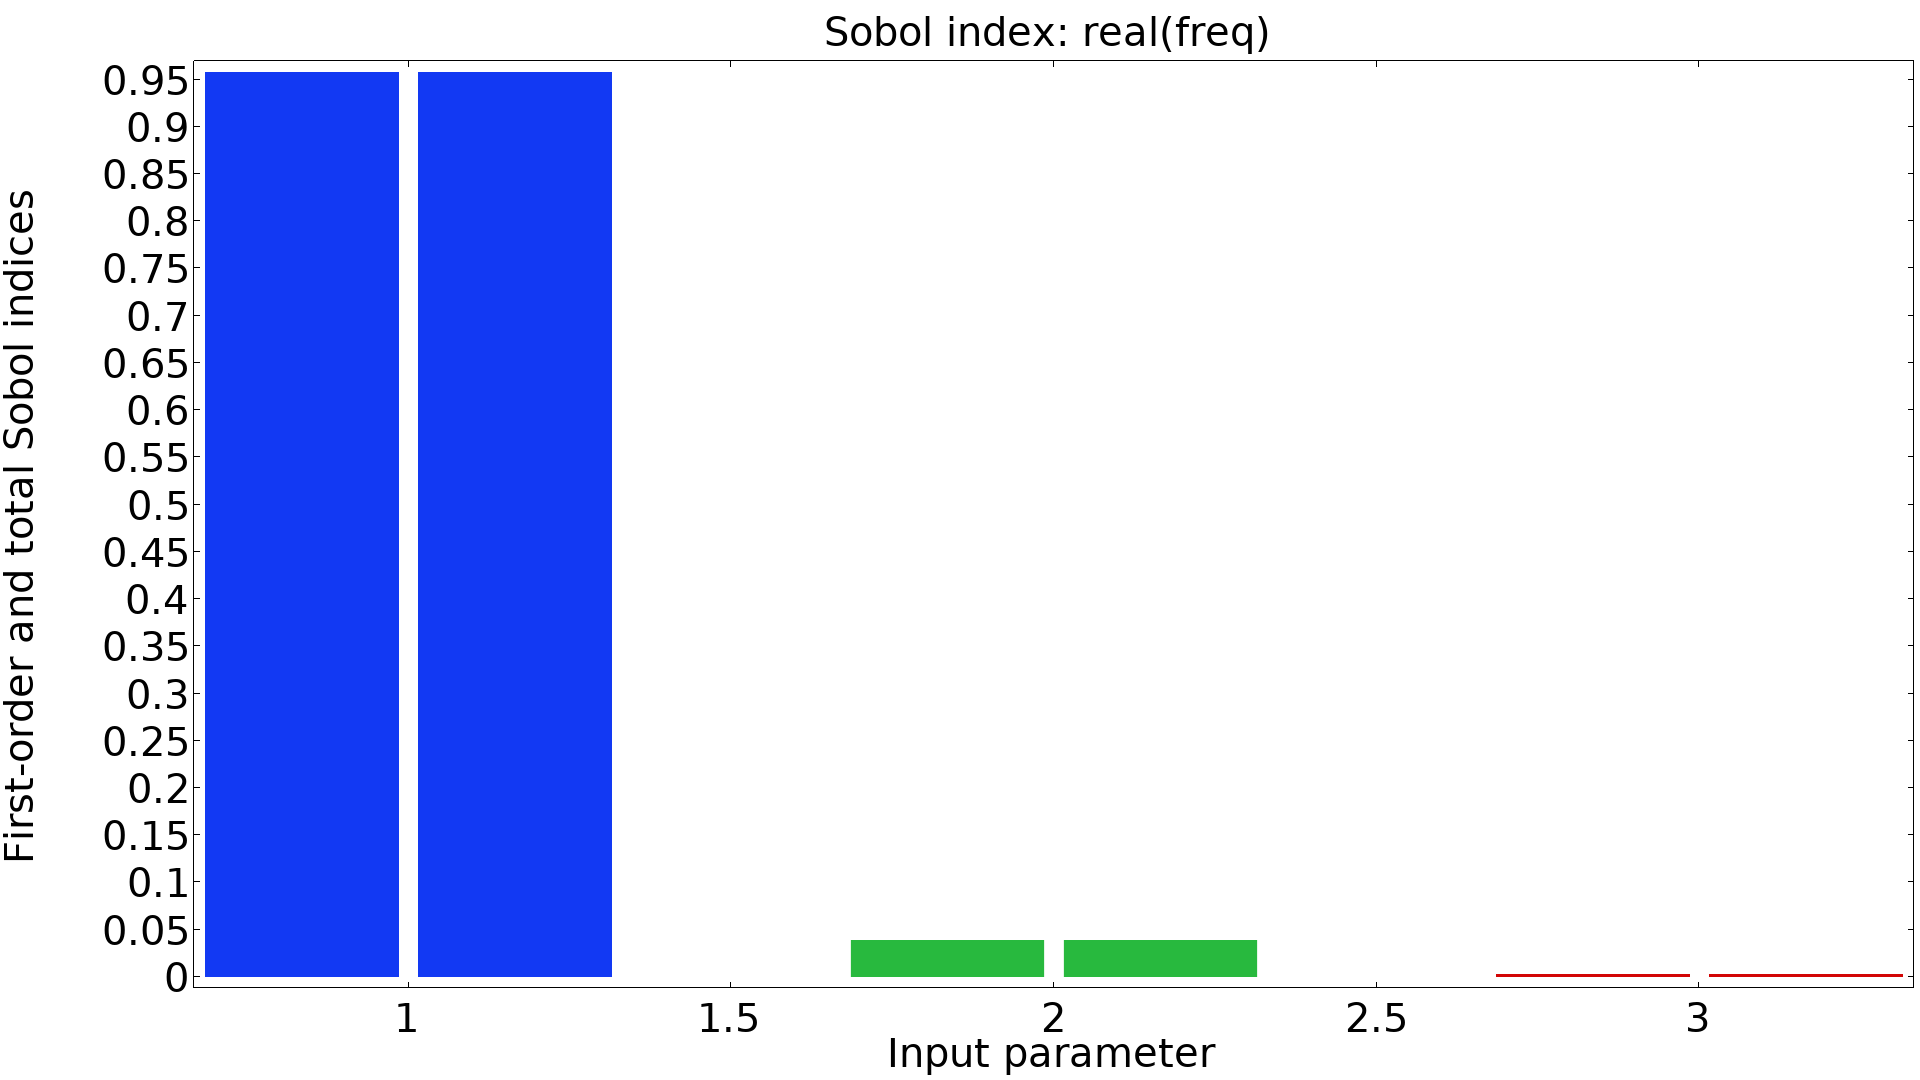 A chart containing blue, green, and red bars shows the results of a sensitivity analysis of the solidly mounted resonator model, with the input parameter on the x-axis and first-order and total Sobol indices on the y-axis.